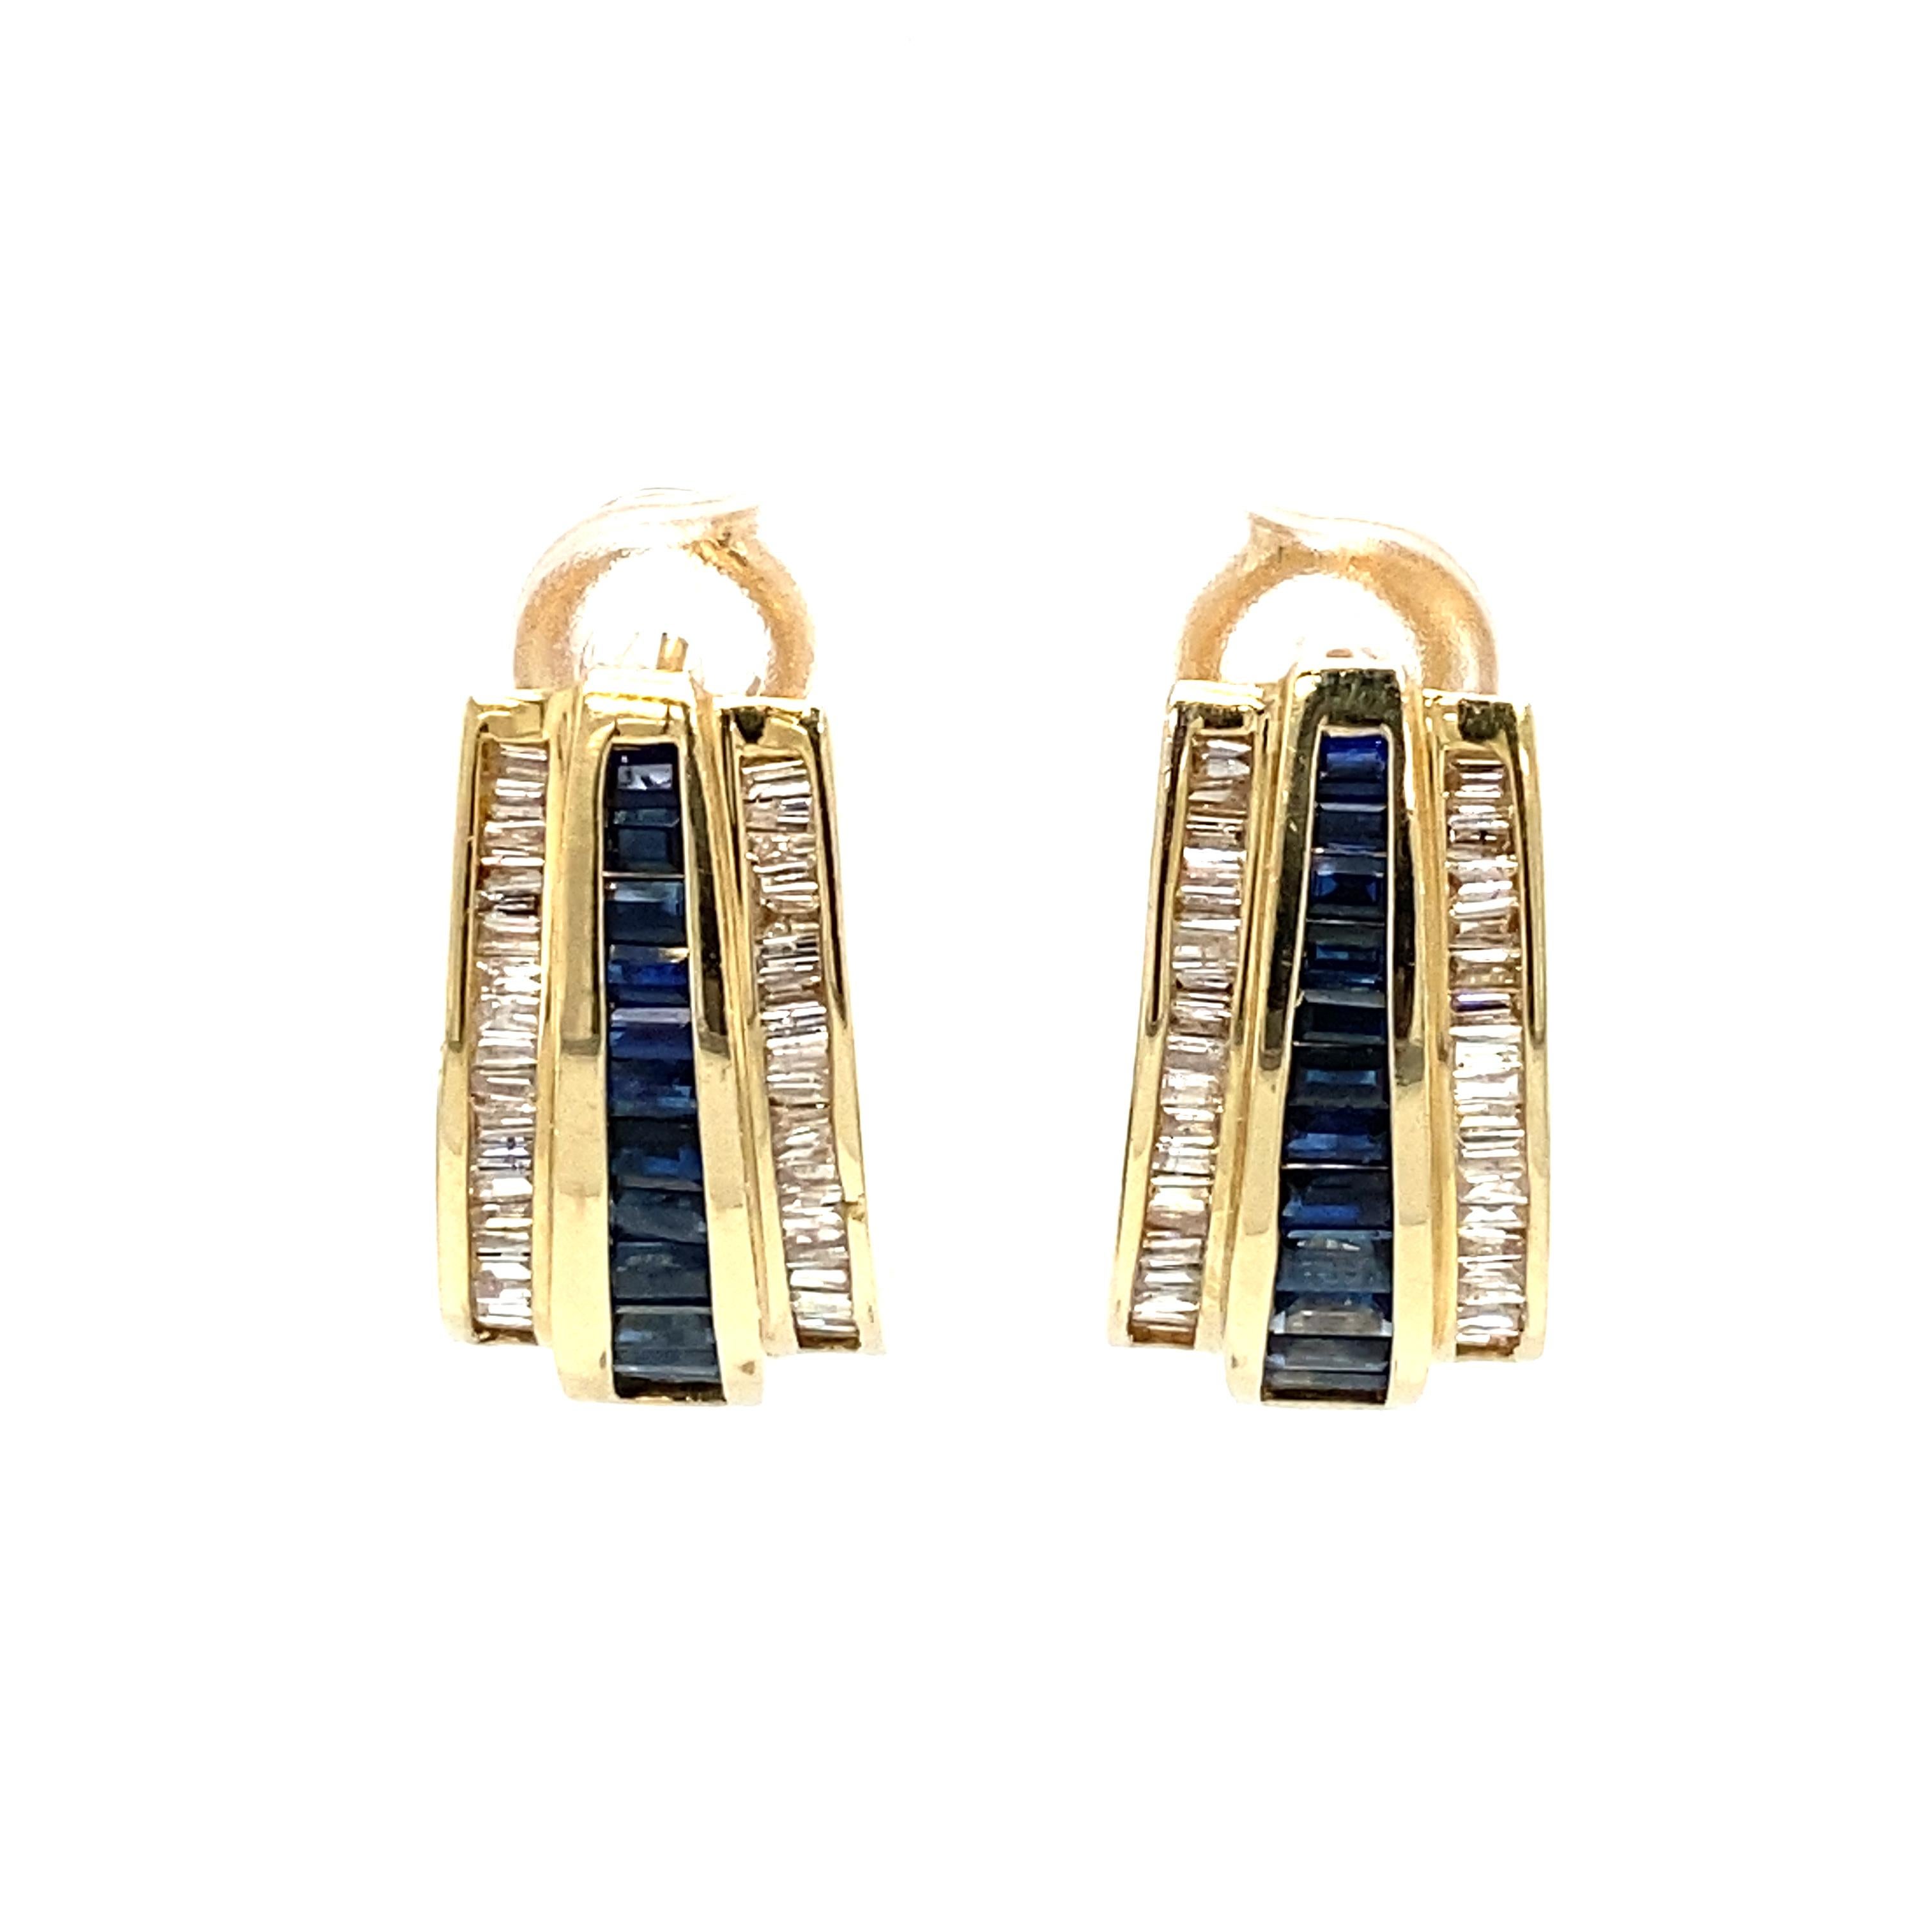 Item Details: These 1950s earrings have baguette blue sapphires and diamonds in a channel set design. They are pierced earrings and have omega clips. 

Circa: 1950s
Metal Type: 14k yellow gold
Weight: 12.3 grams
Size: 1.0 in Length

Diamond